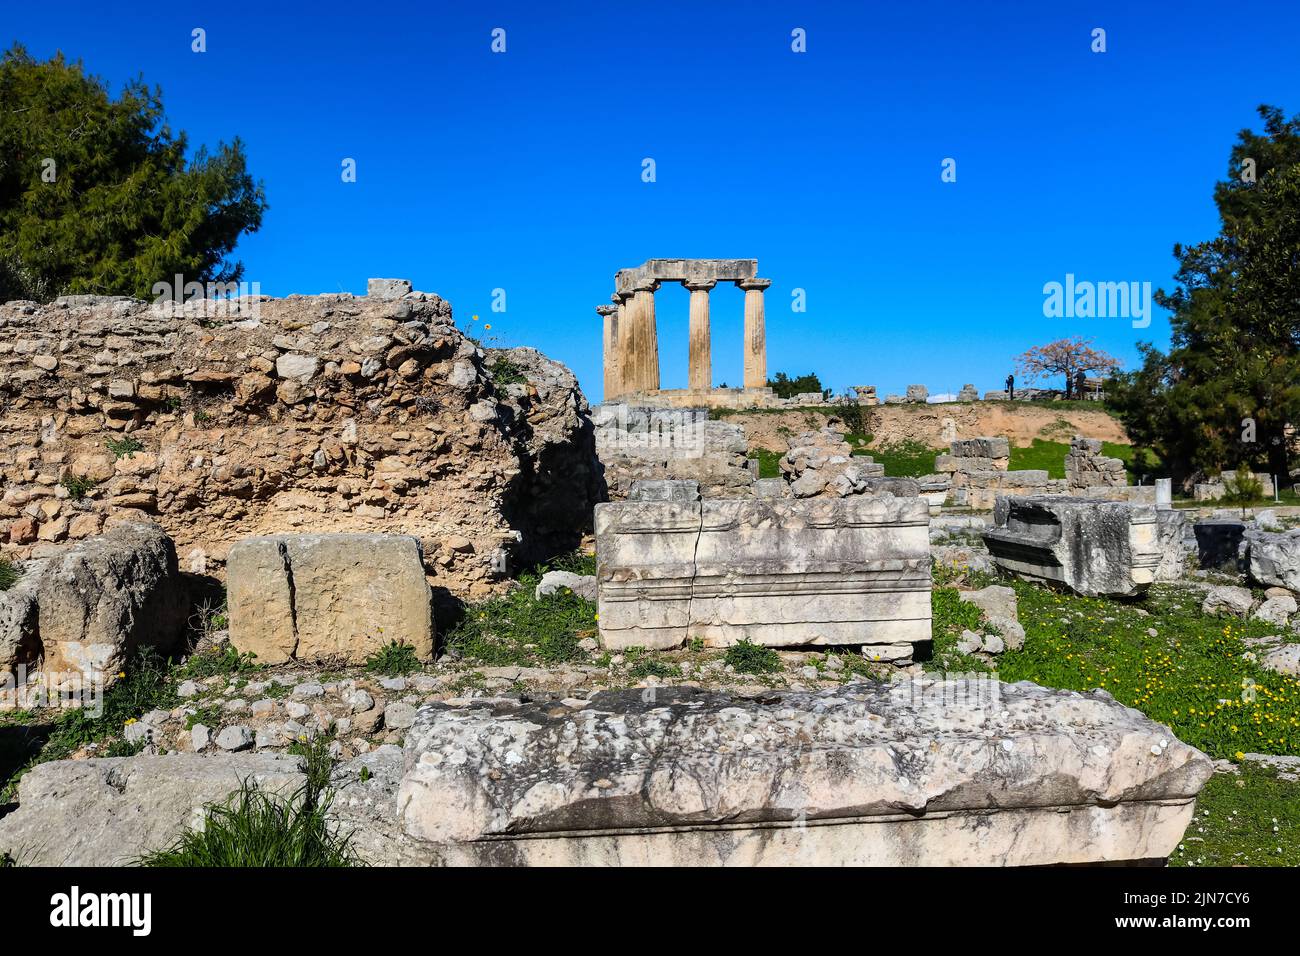 Temple of Apollo in ancient Corinth Greece viewed from down the hll in the excavated ruins with unidentifiable tourists taking pictures up above and y Stock Photo